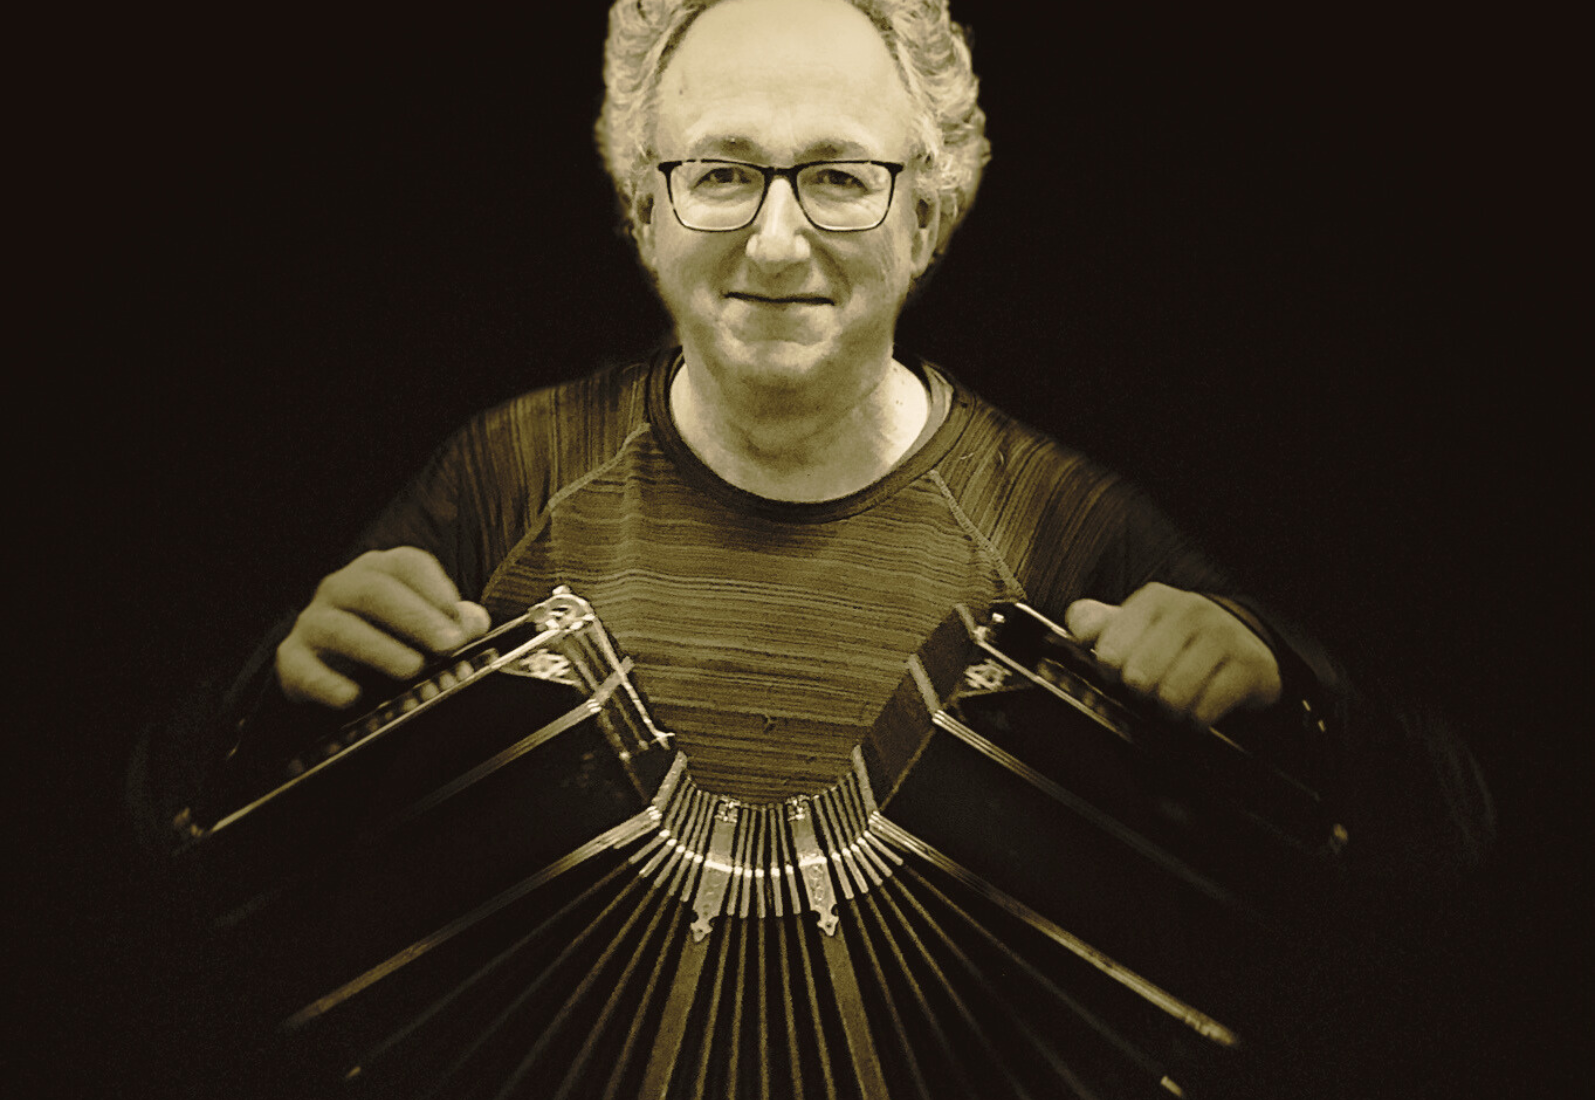 Julian Rowlands will play the bandoneon at this year's Harrogate Music Festival